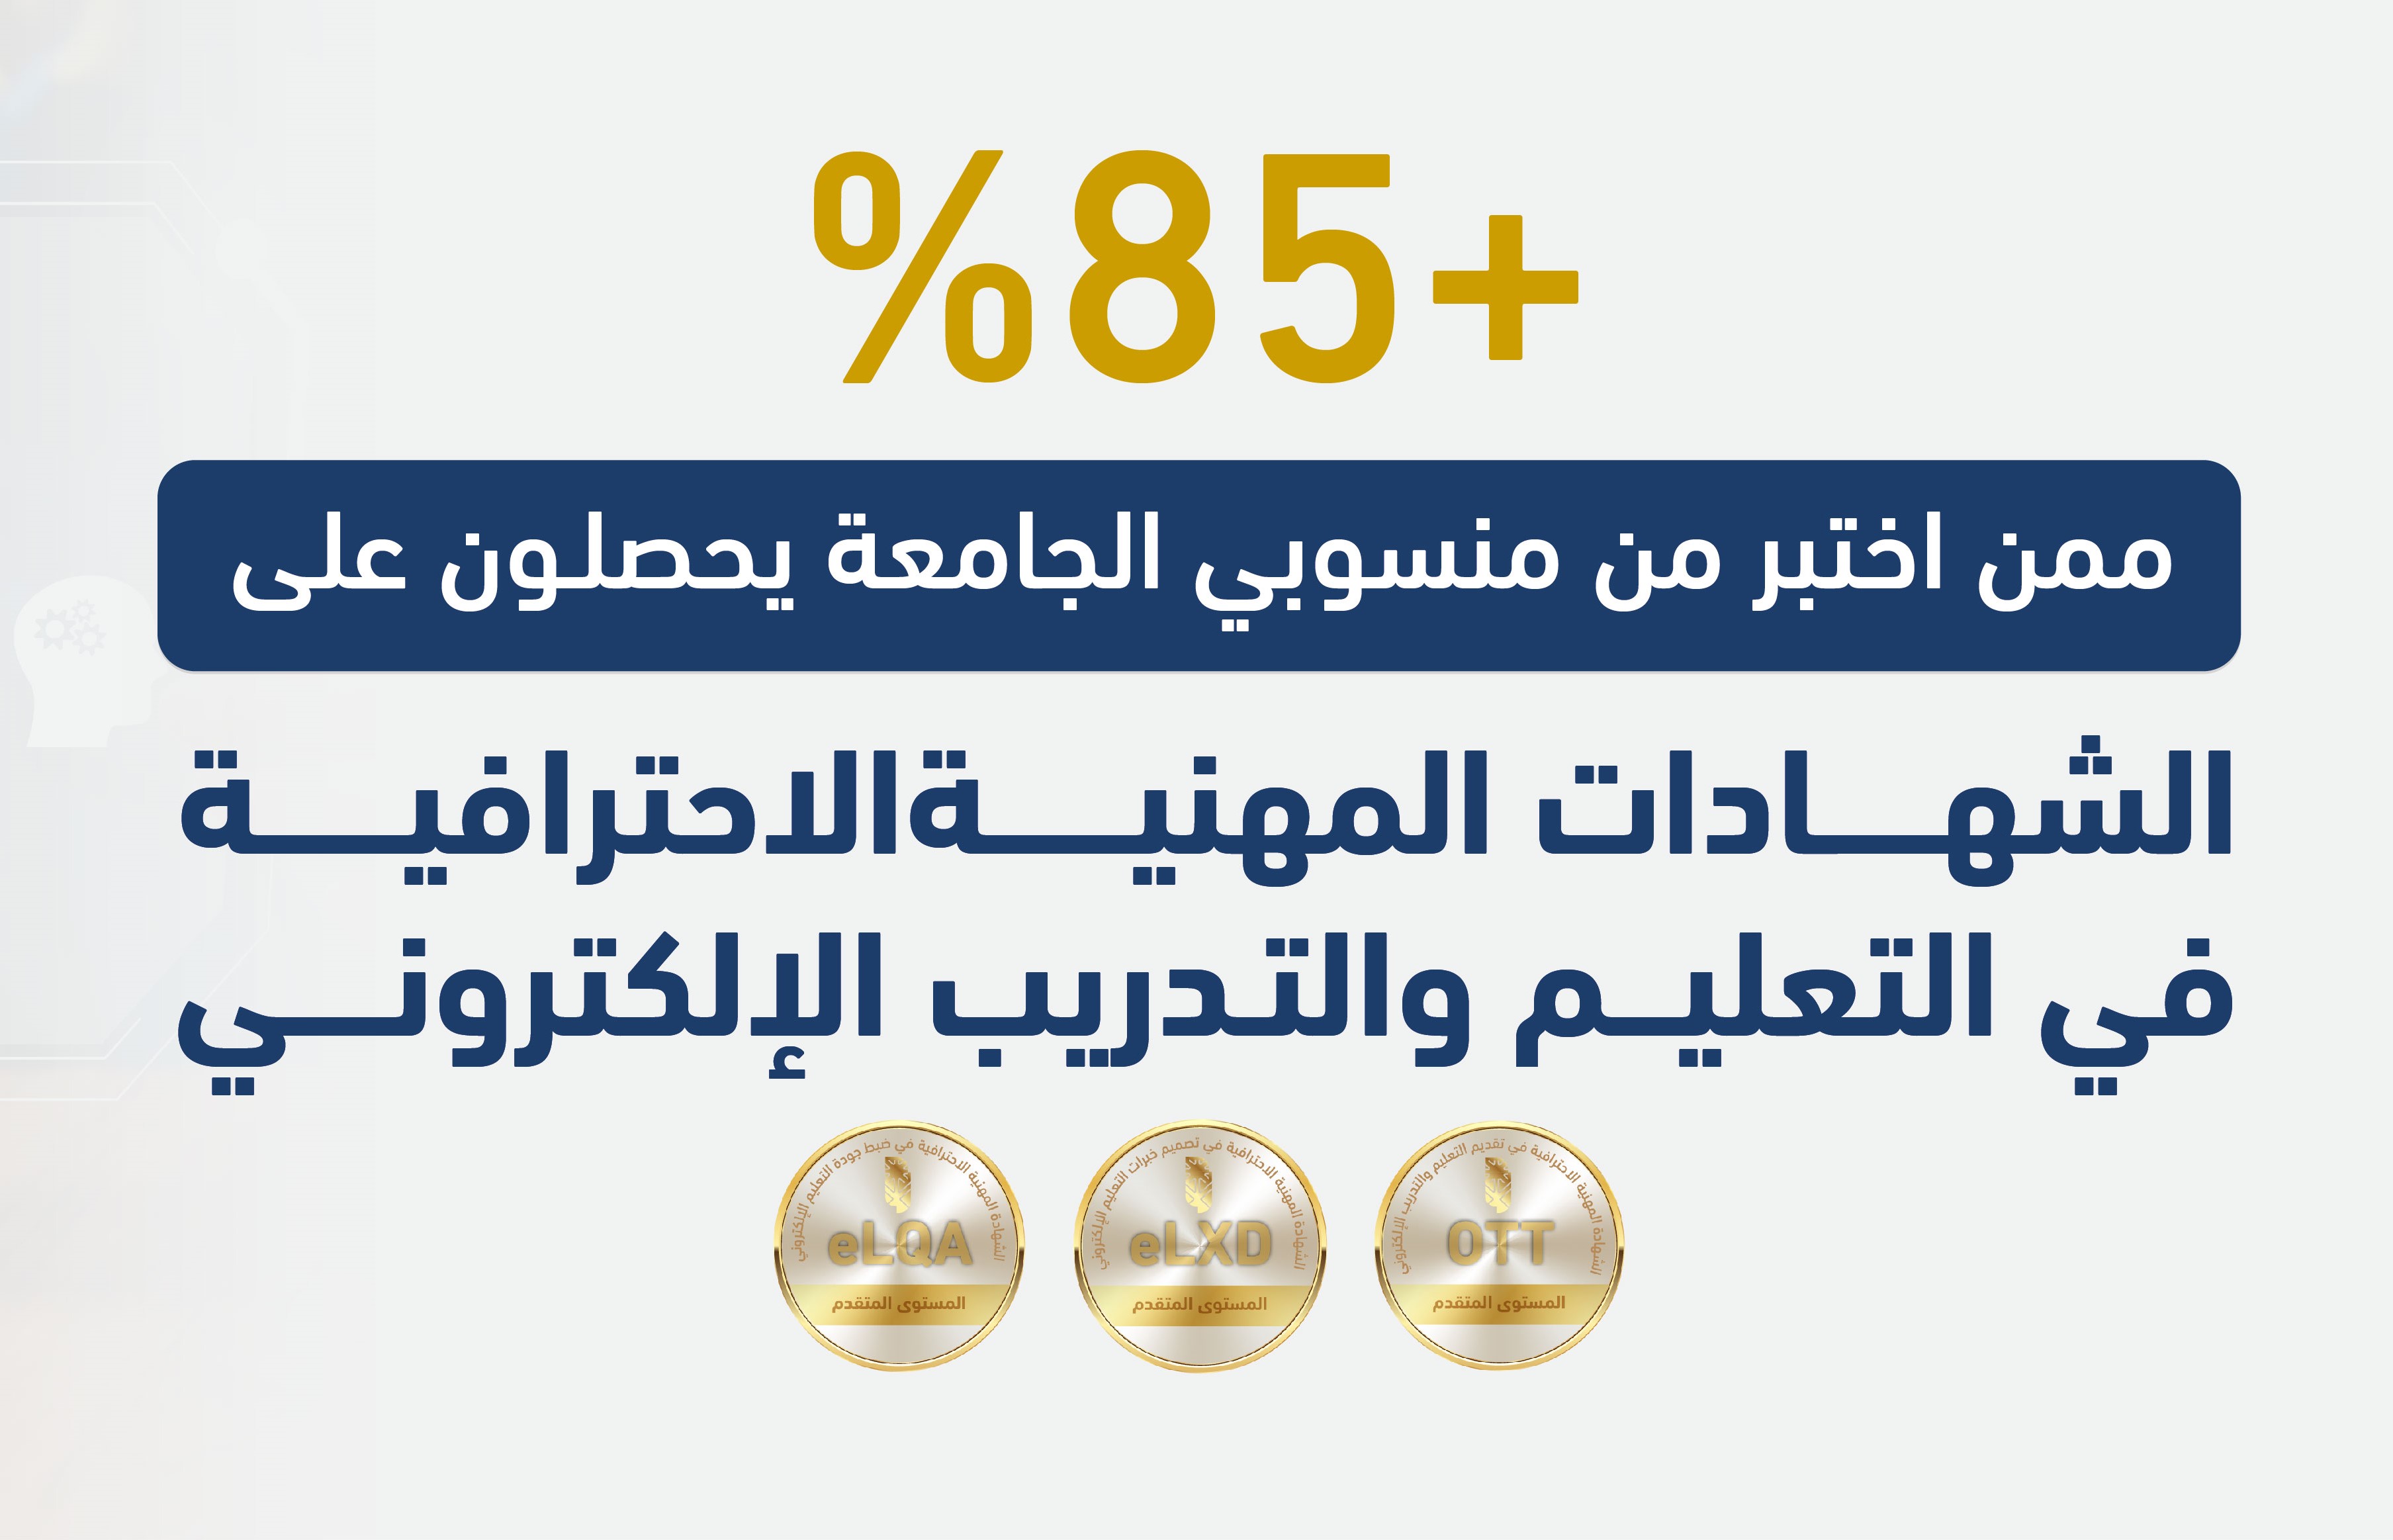 More than 85% of the university’s tested employees obtained professional certificates in e-education and training